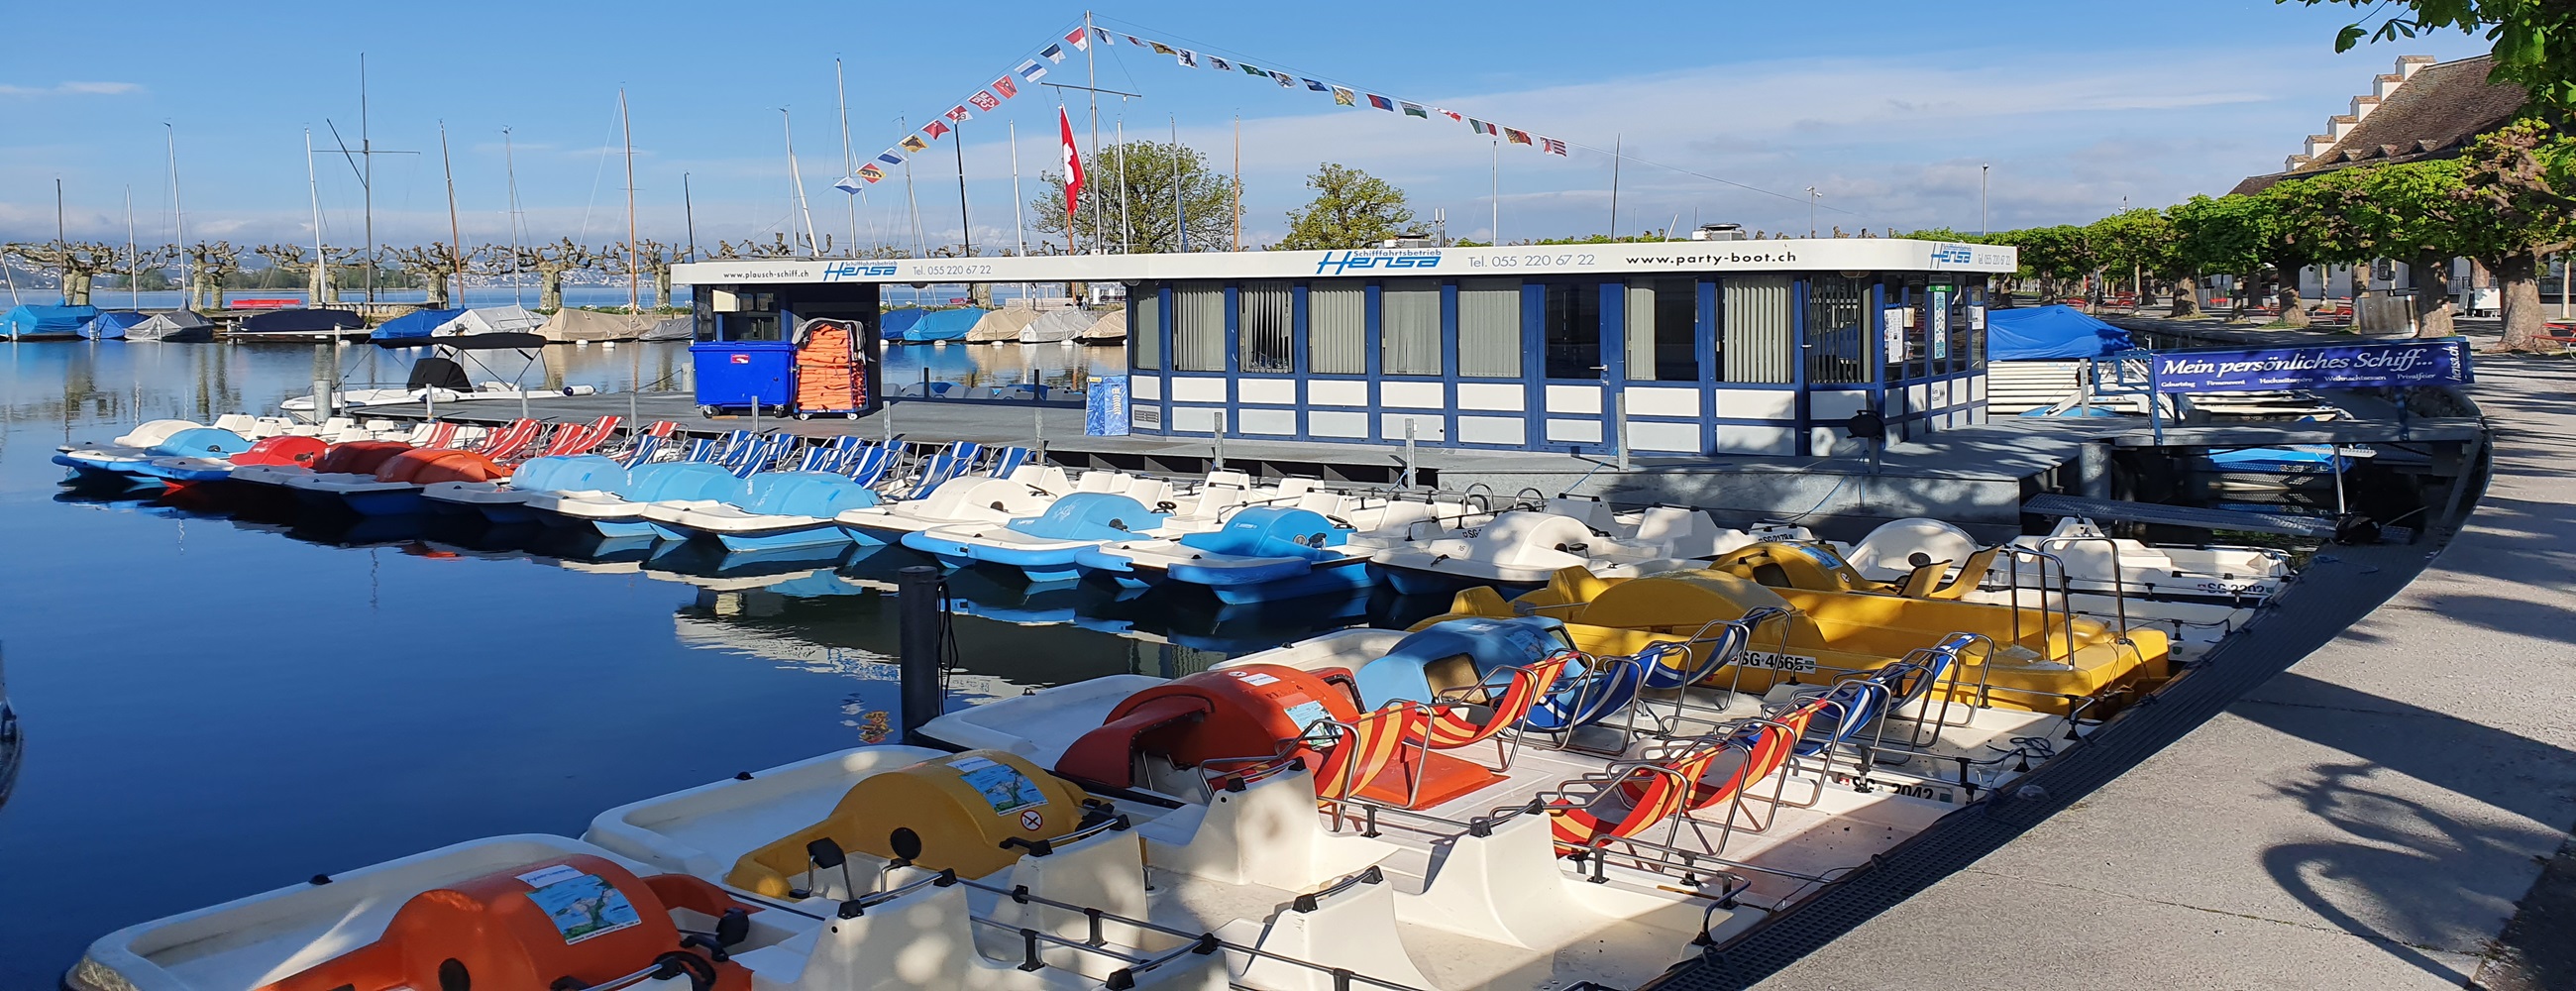 pedalo-hensa-werft-rapperswil-06